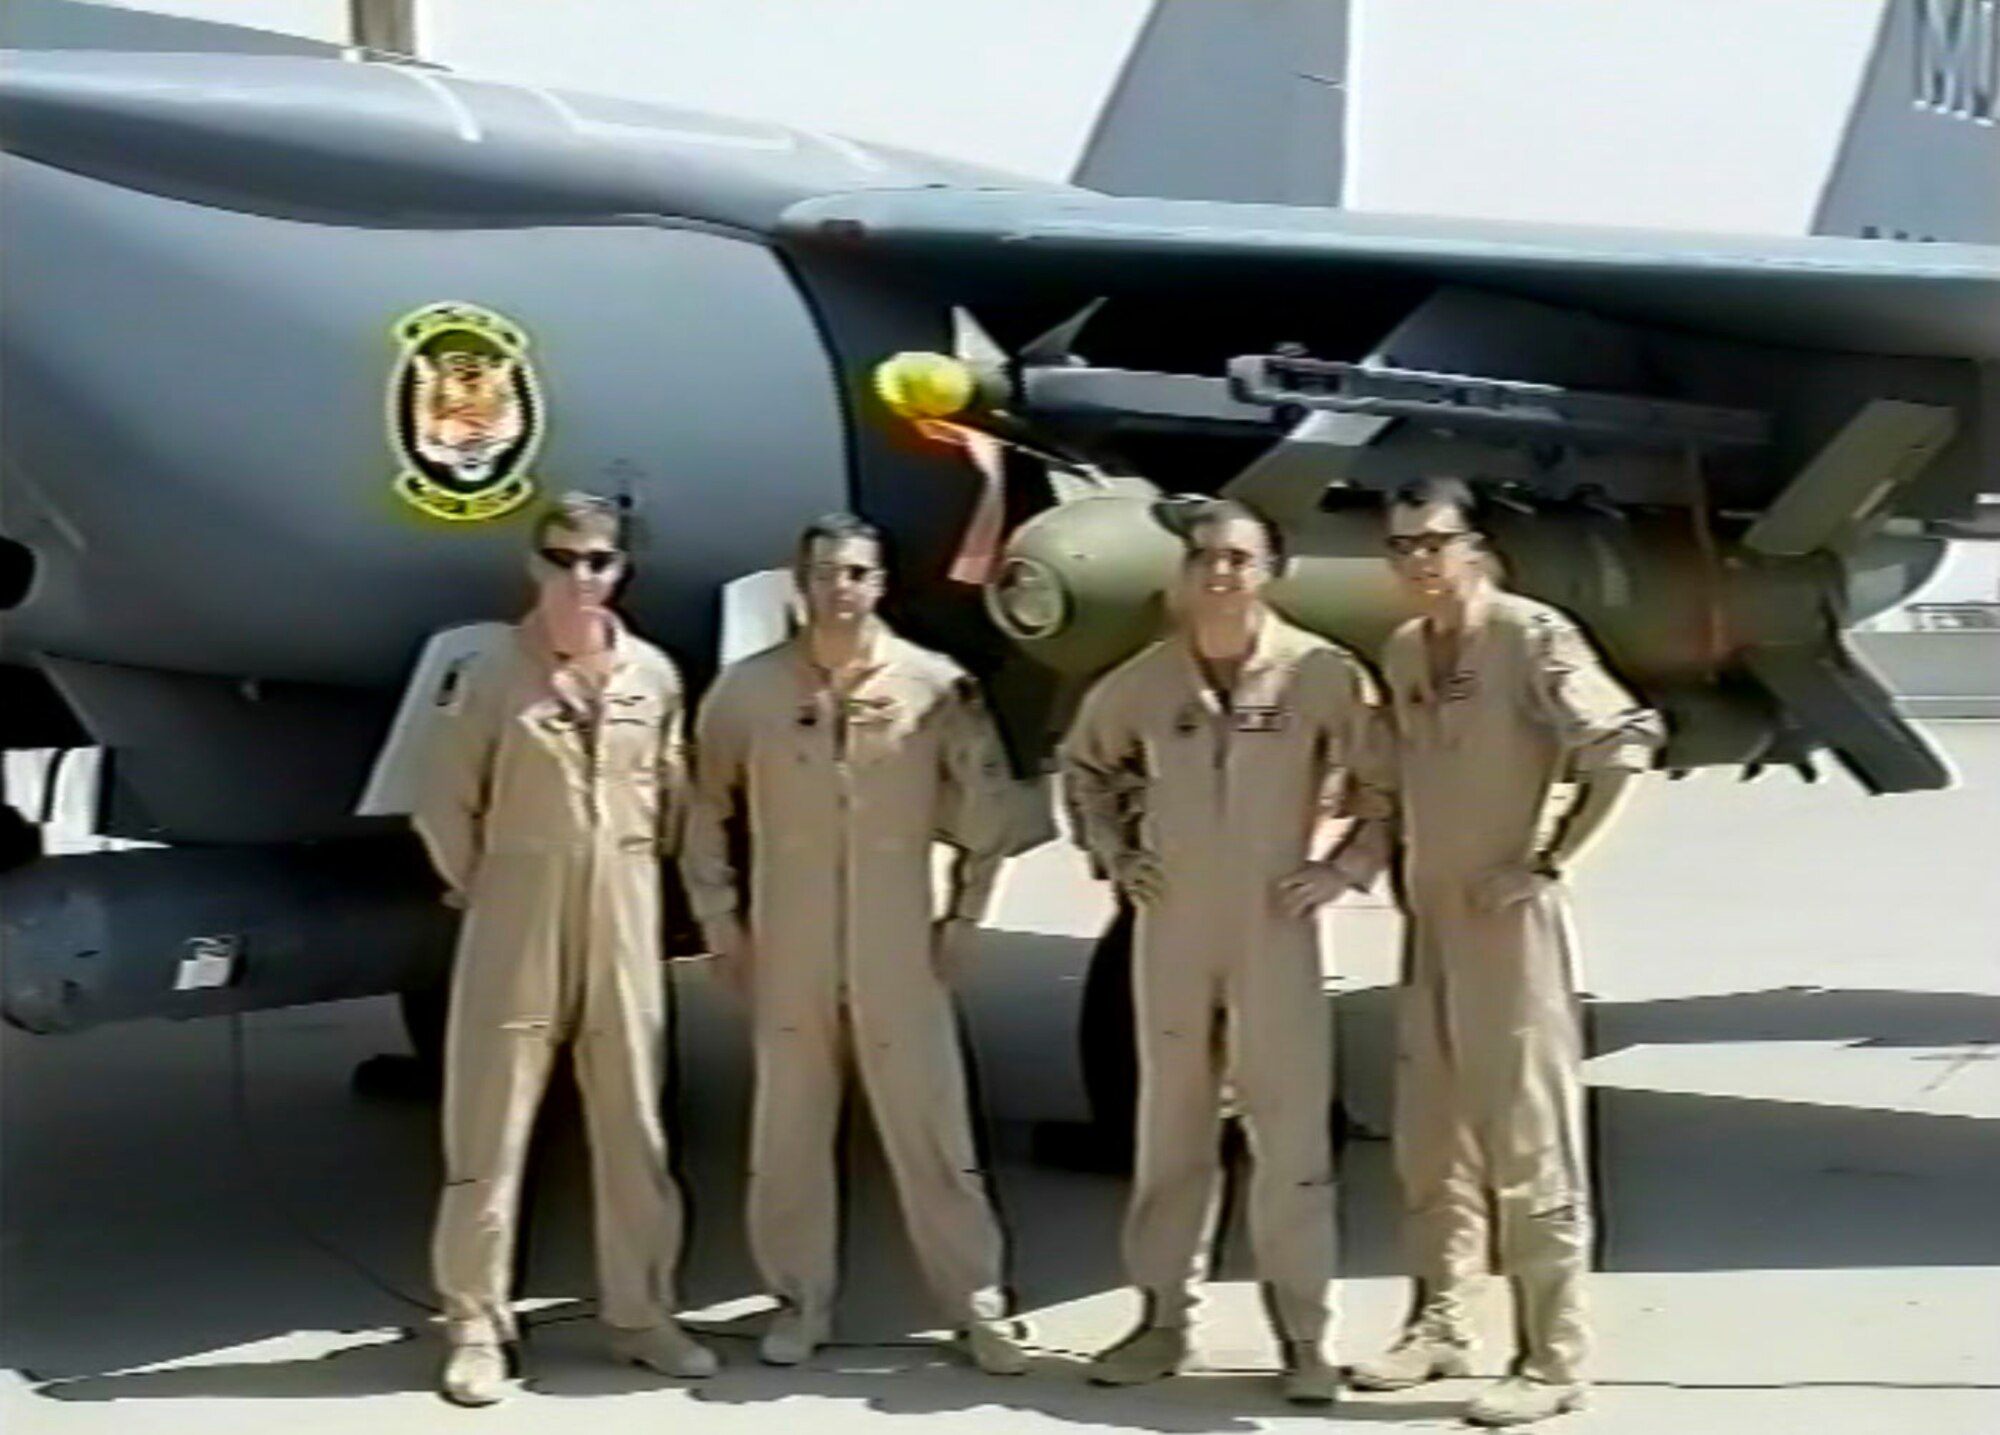 From left to right: retired Col. Mike Ballek, former Maj. Kevin Mulleni, Col. Jack
Fischer and Lt. Col. Jeff Donnithorne pose for a photo in front of a F-15E Strike Eagle
during Operation Southern Watch in 2002. Years after this photo was taken Fischer would be given the opportunity to travel to space. (Courtesy Photo)